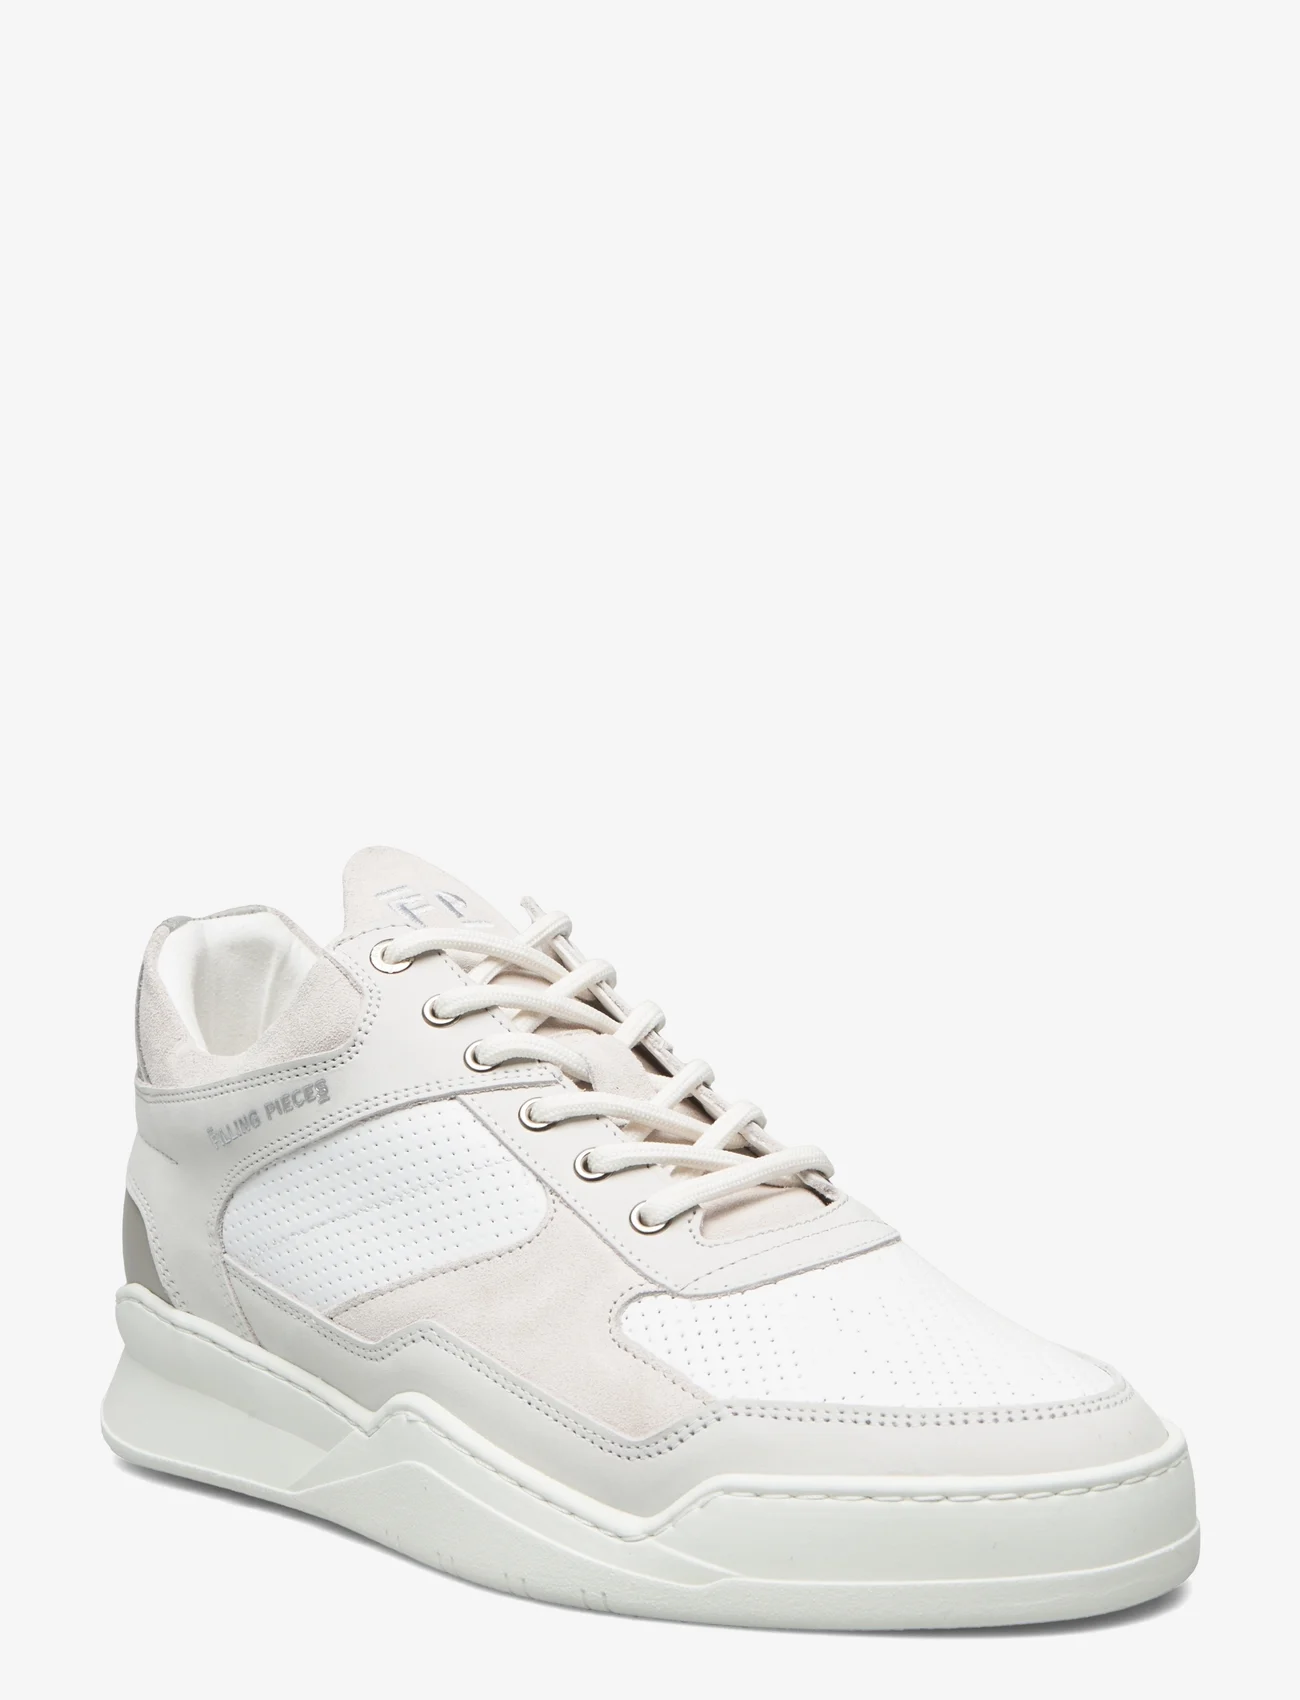 Filling Pieces - Low Top Ghost Paneled White - spring shoes - white - 0